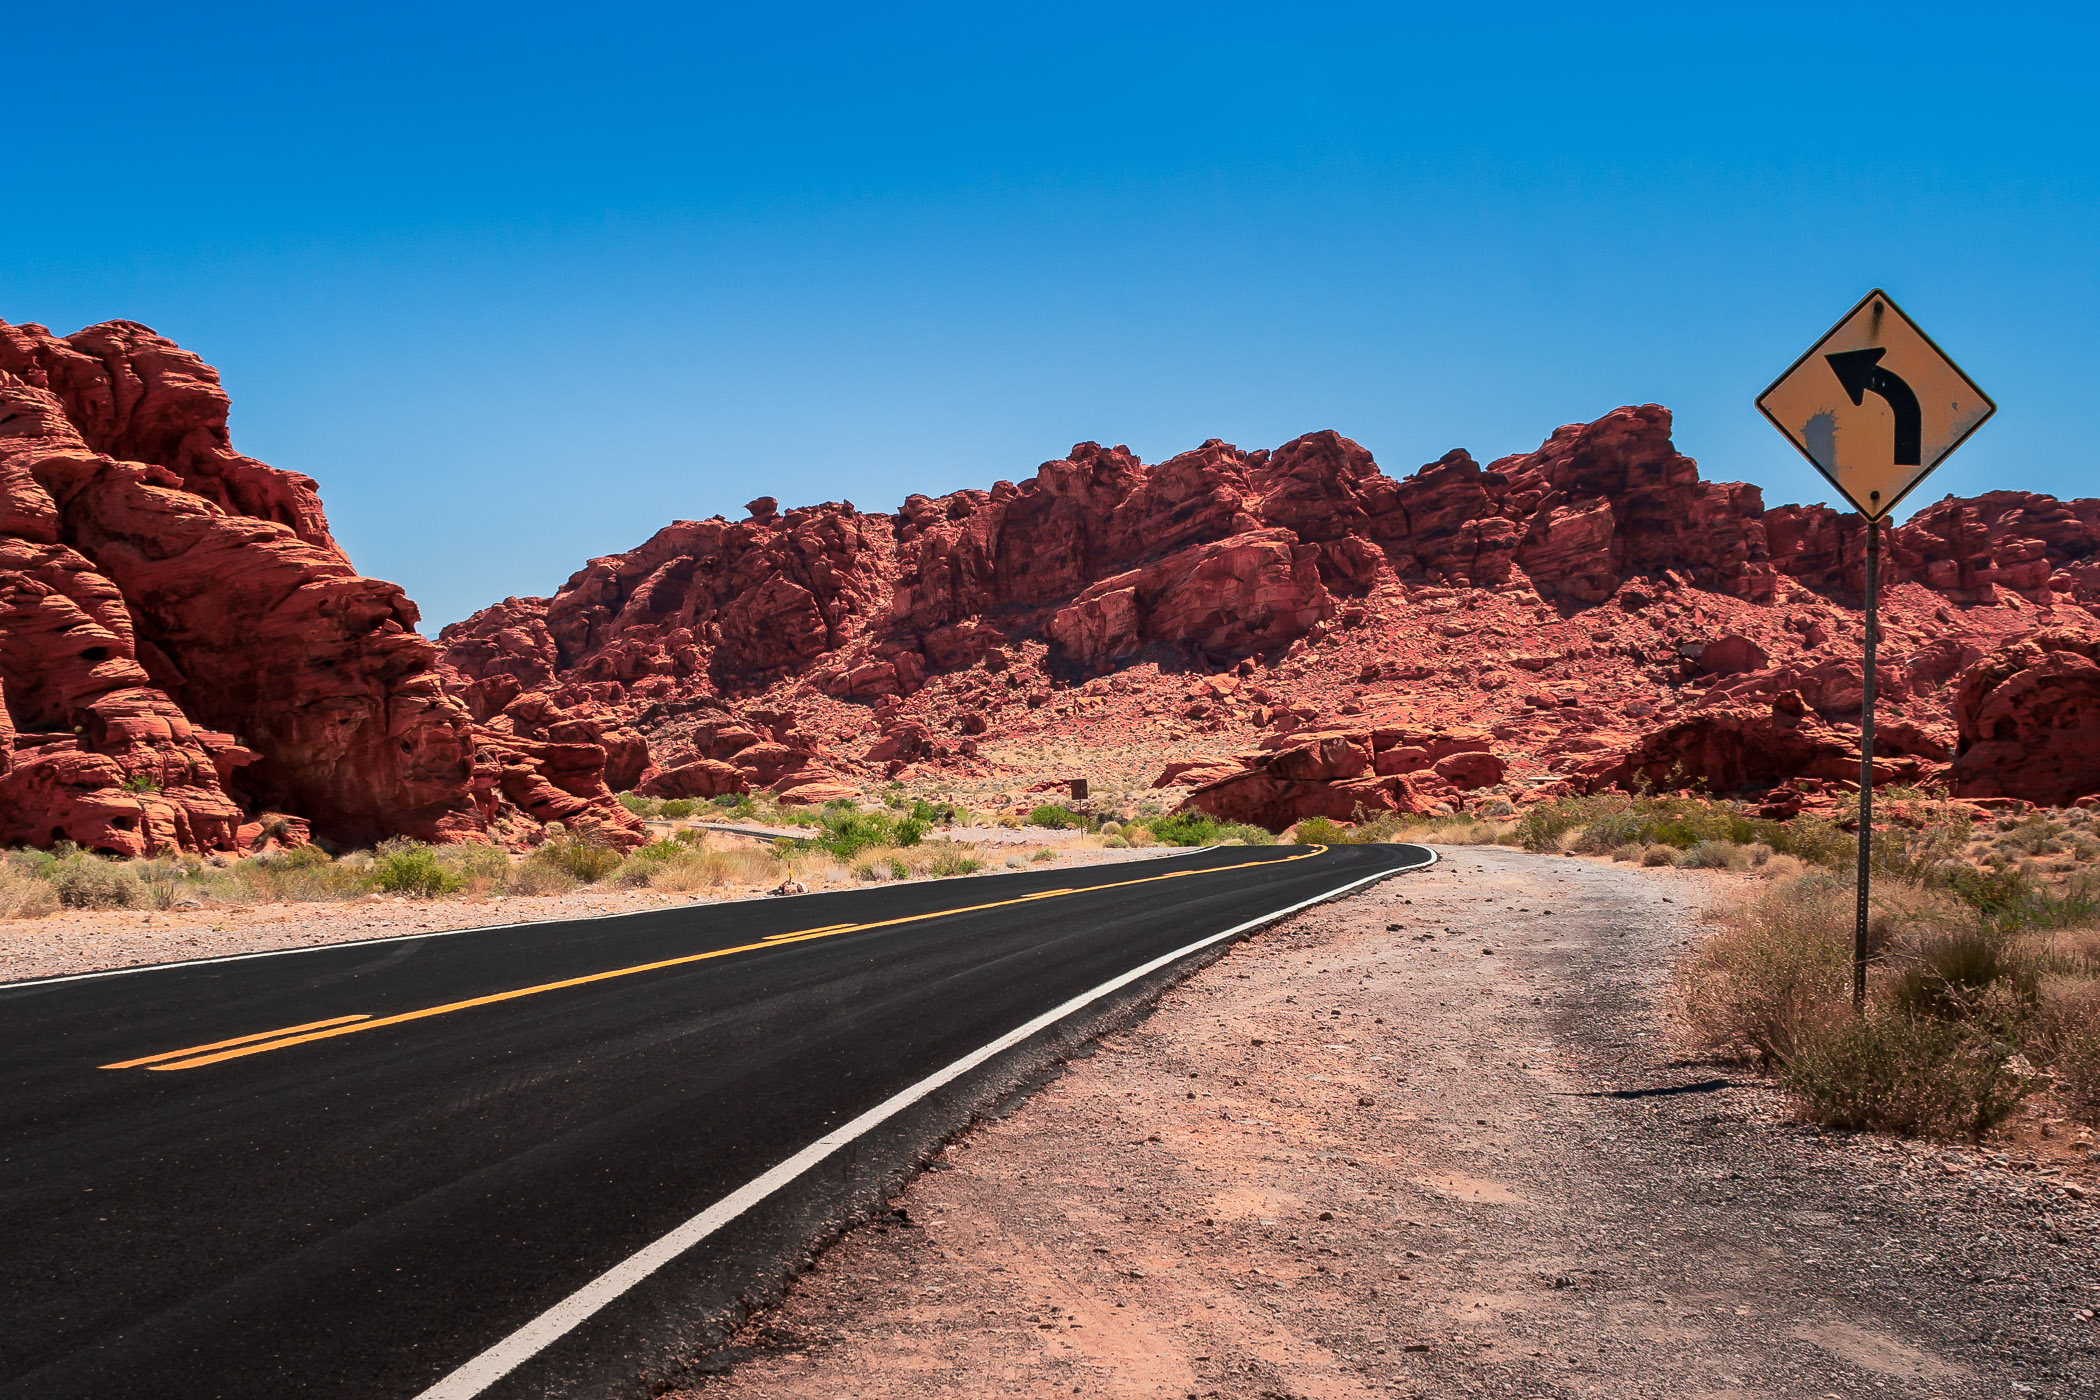 A desert road winds through the rocky landscape of Valley of Fire, Nevada.